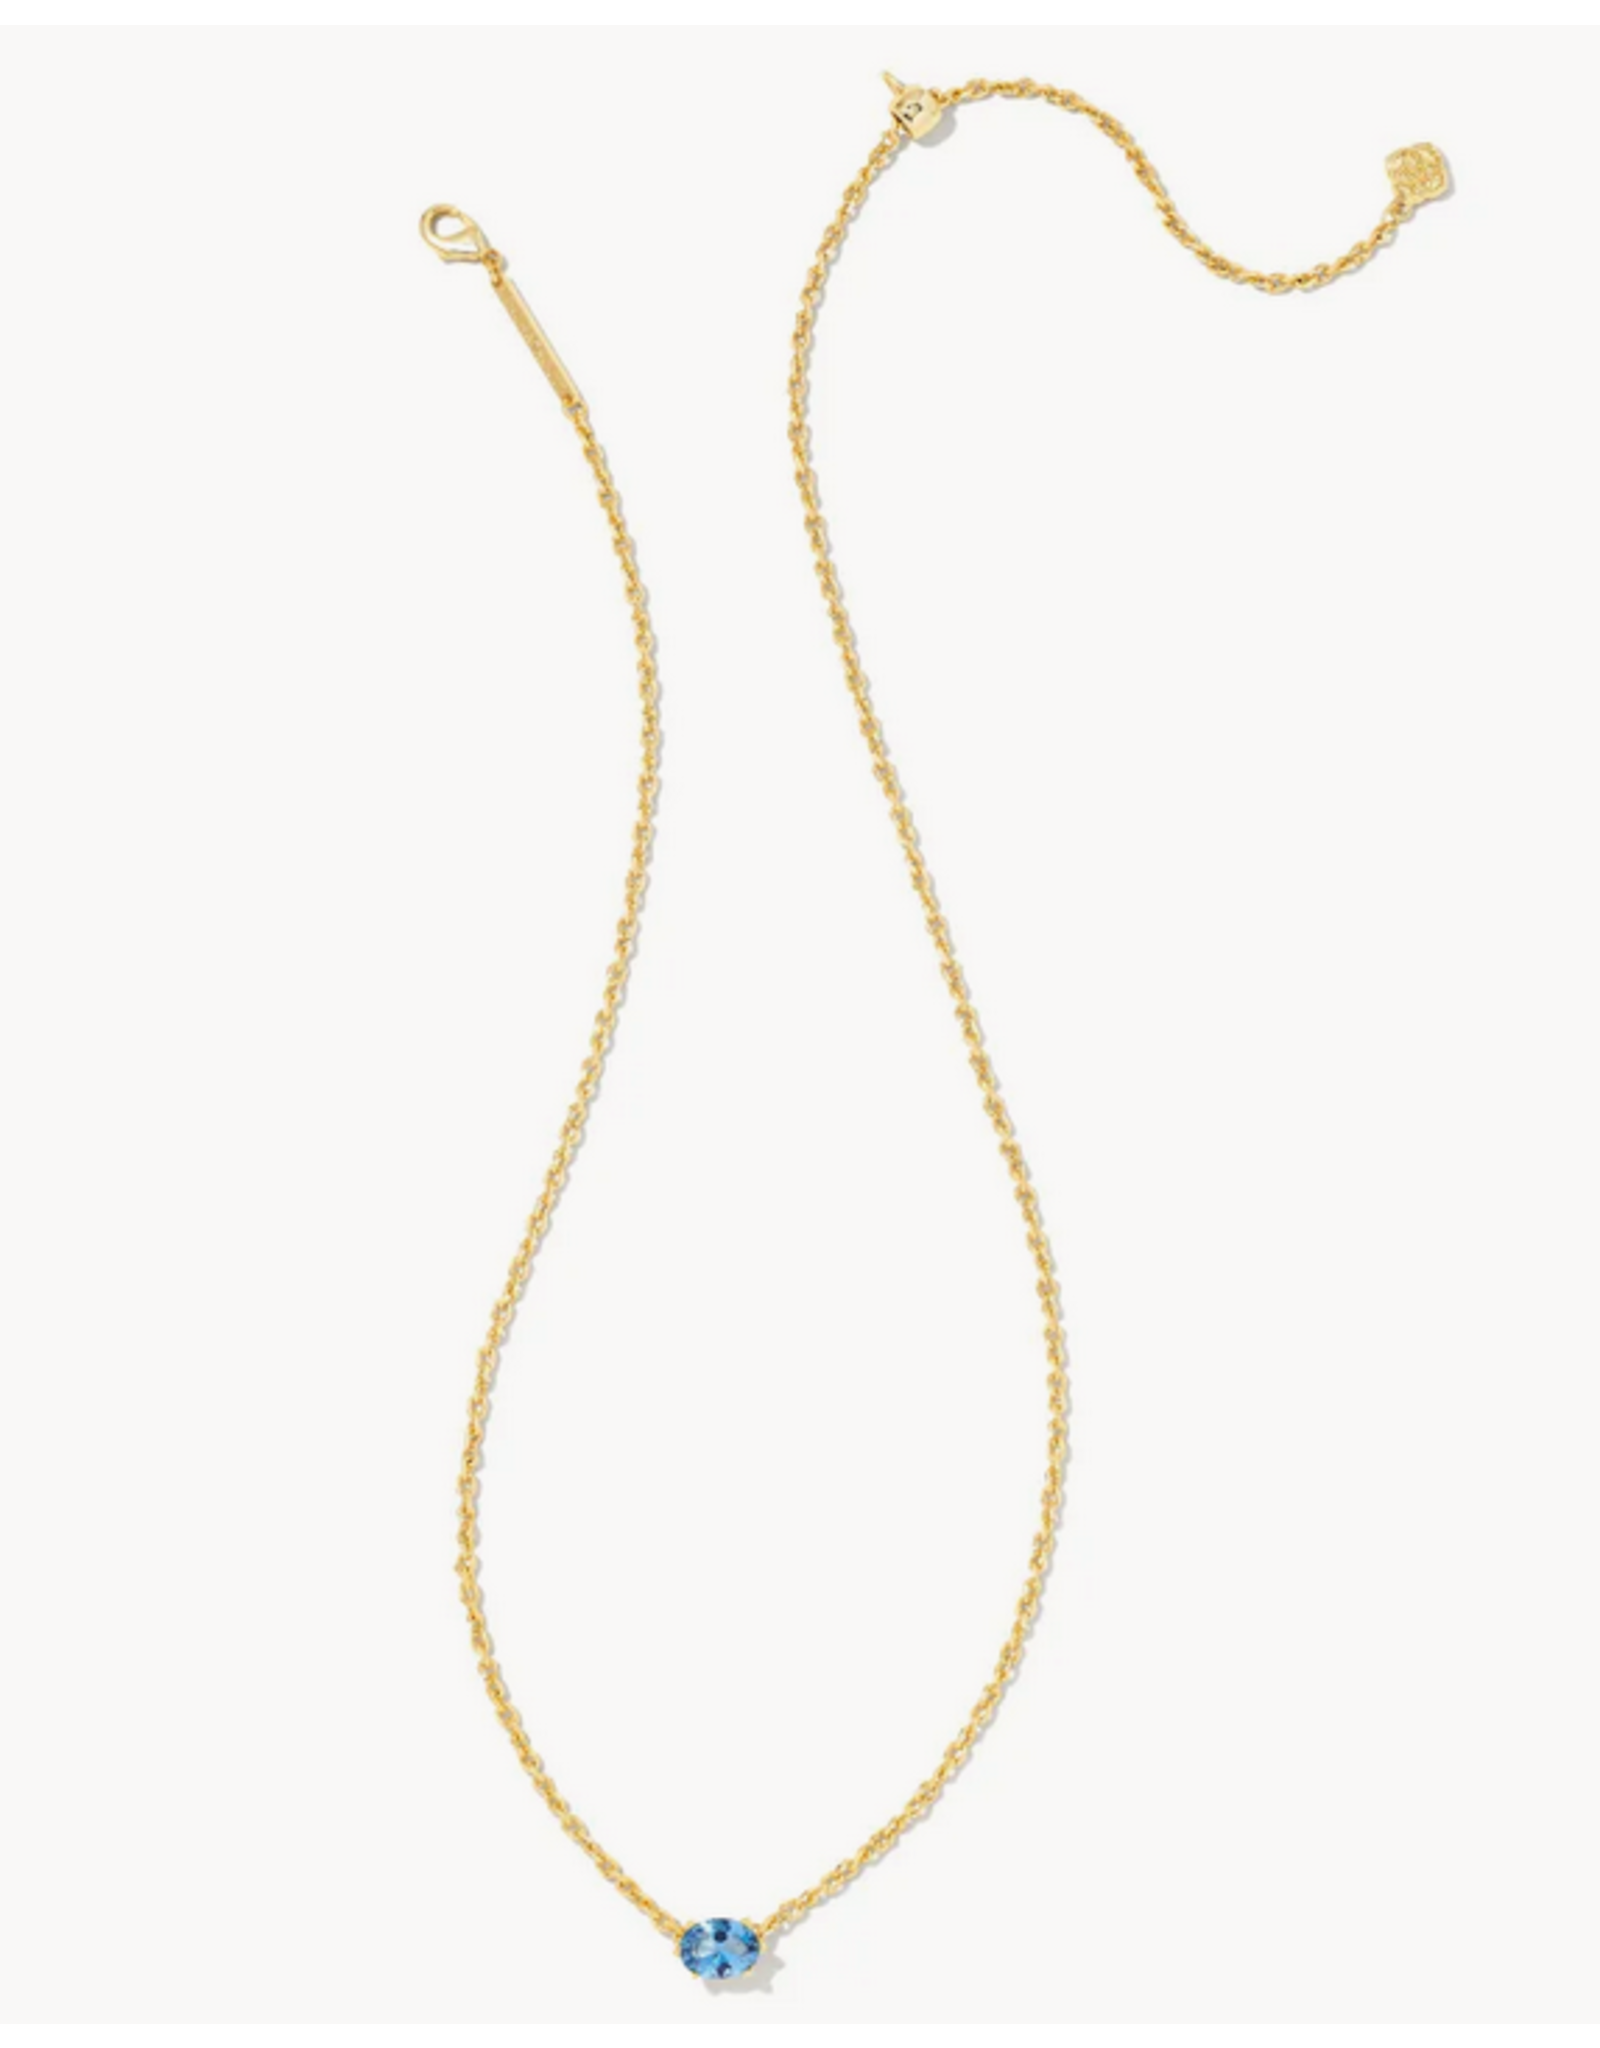 Buy Kendra Scott Elisa Necklace in Bright Aqua Drusy, 14k Gold-Plated at  Amazon.in